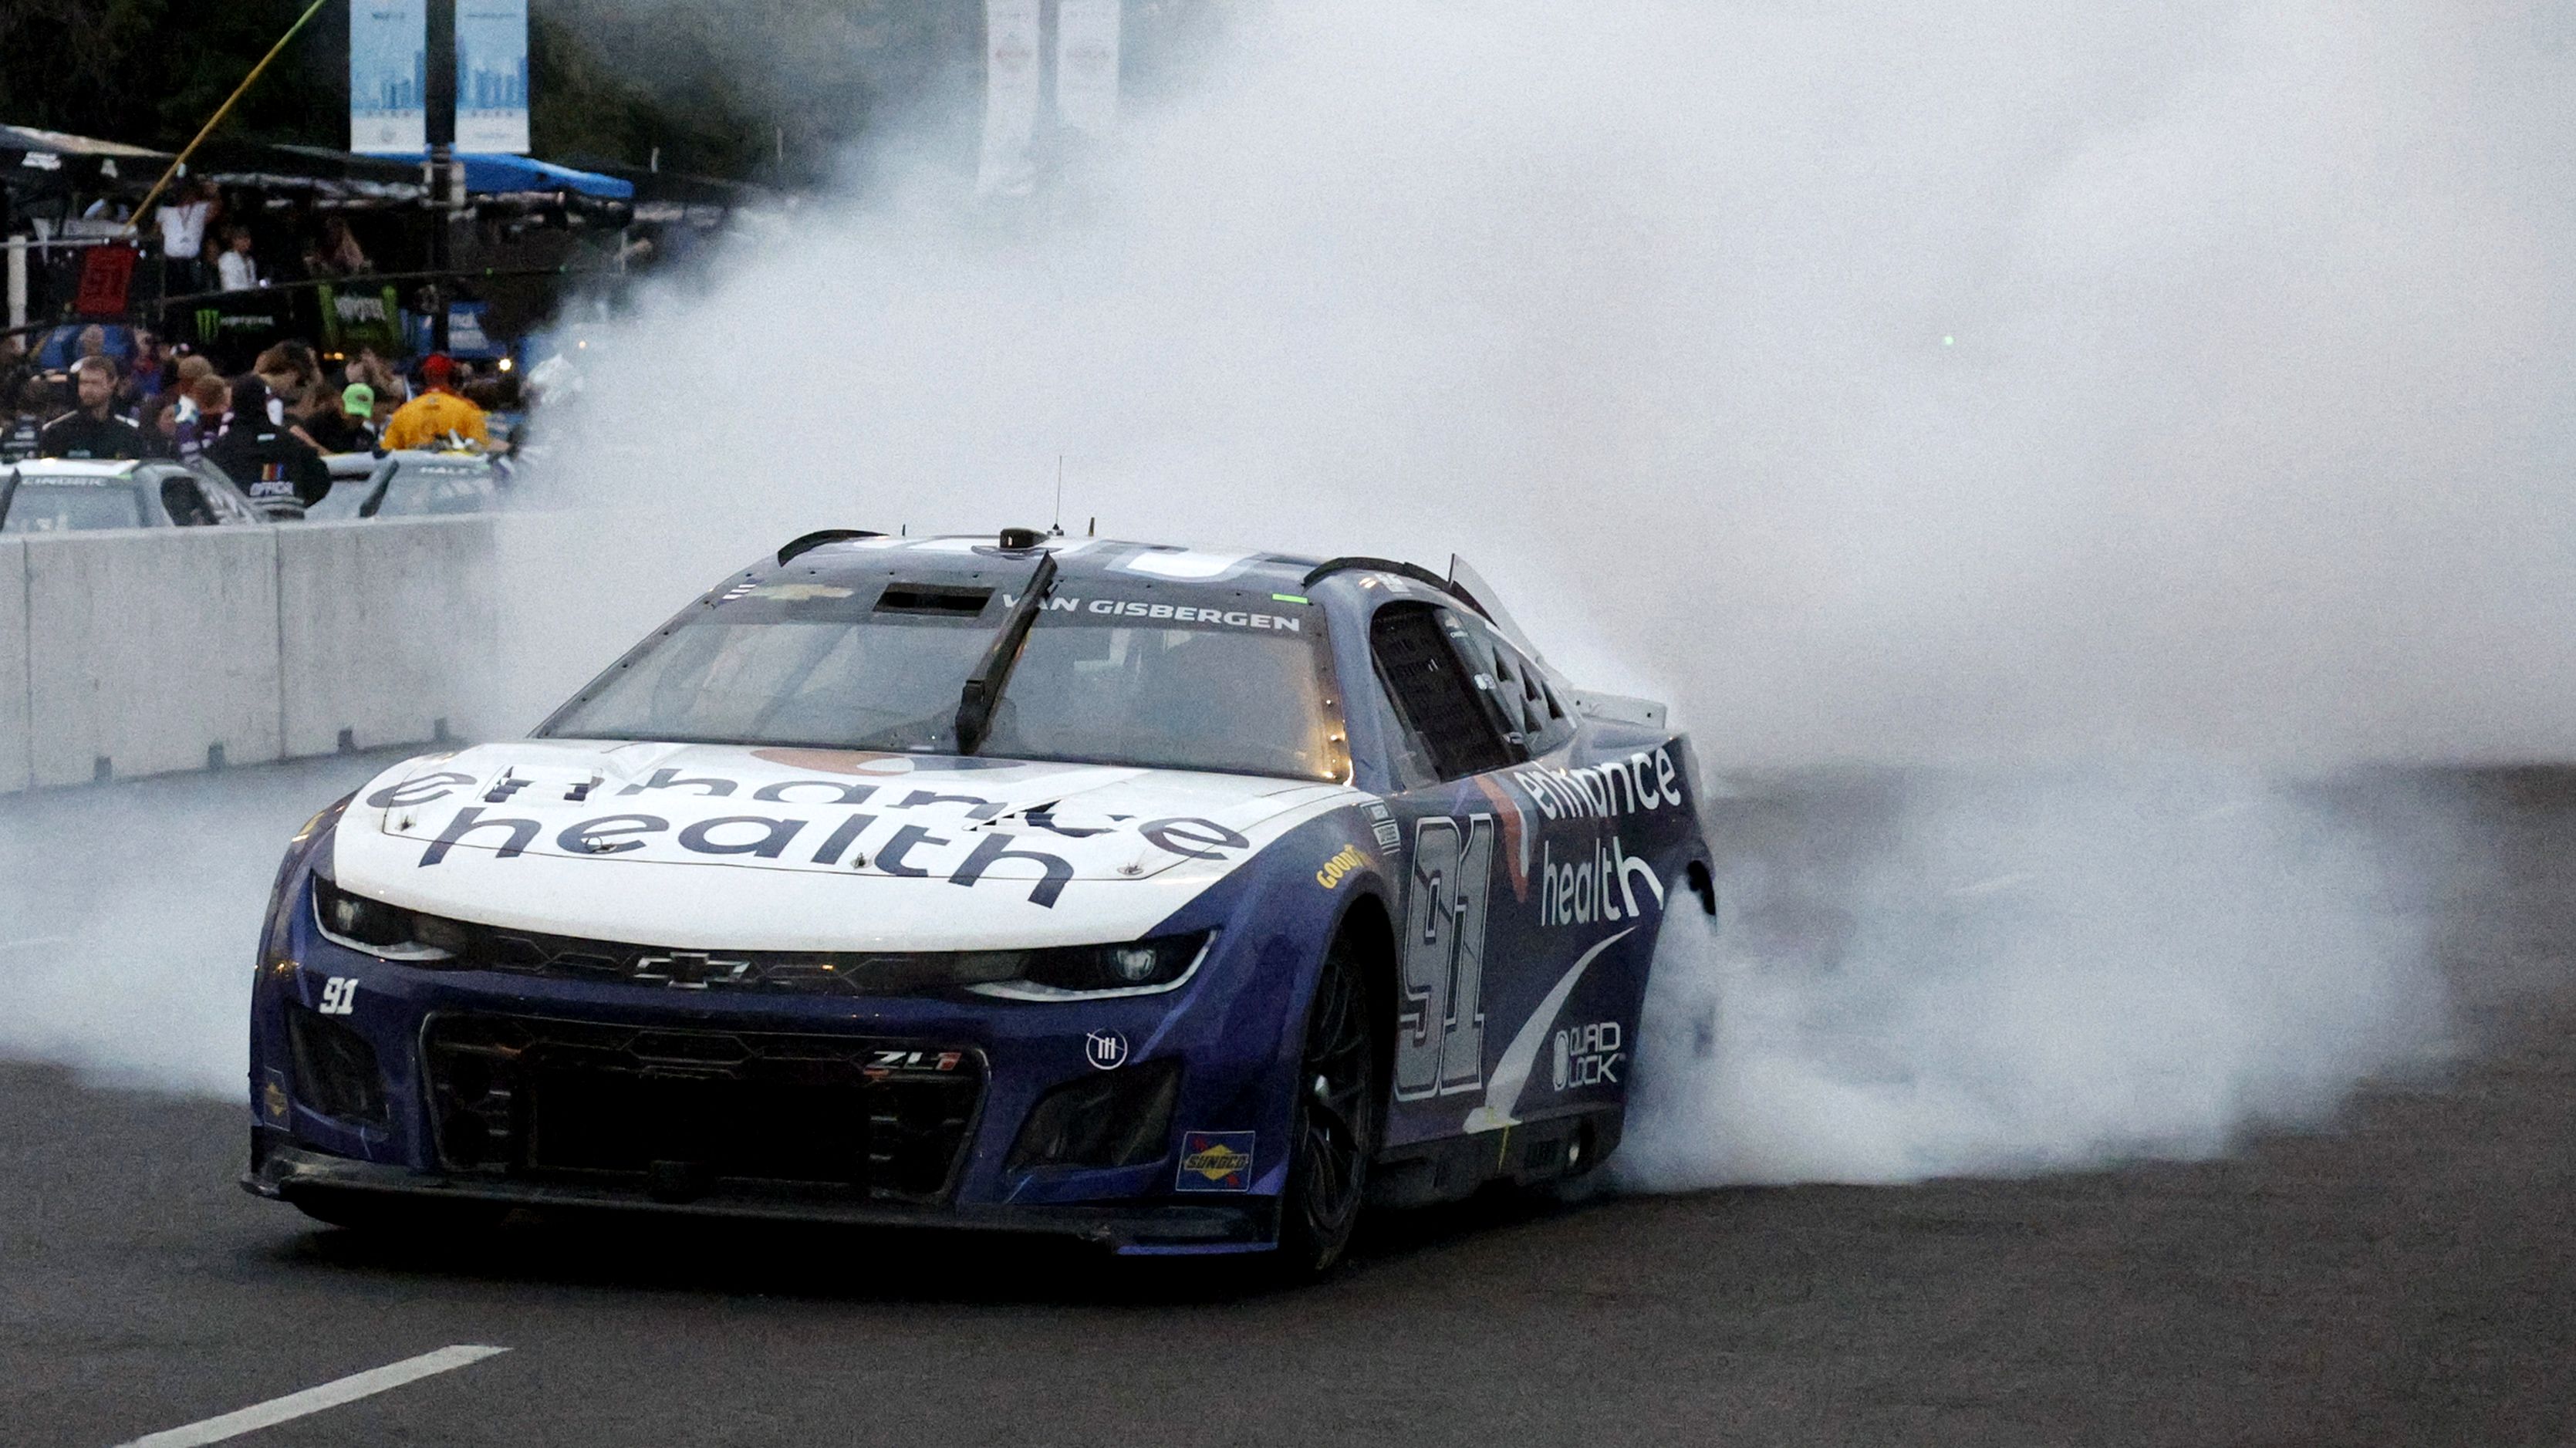 Shane Van Gisbergen, driver of the No.91 Chevrolet Camaro, celebrates with a burnout after winning the NASCAR Cup Series race at the Chicago Street Course.